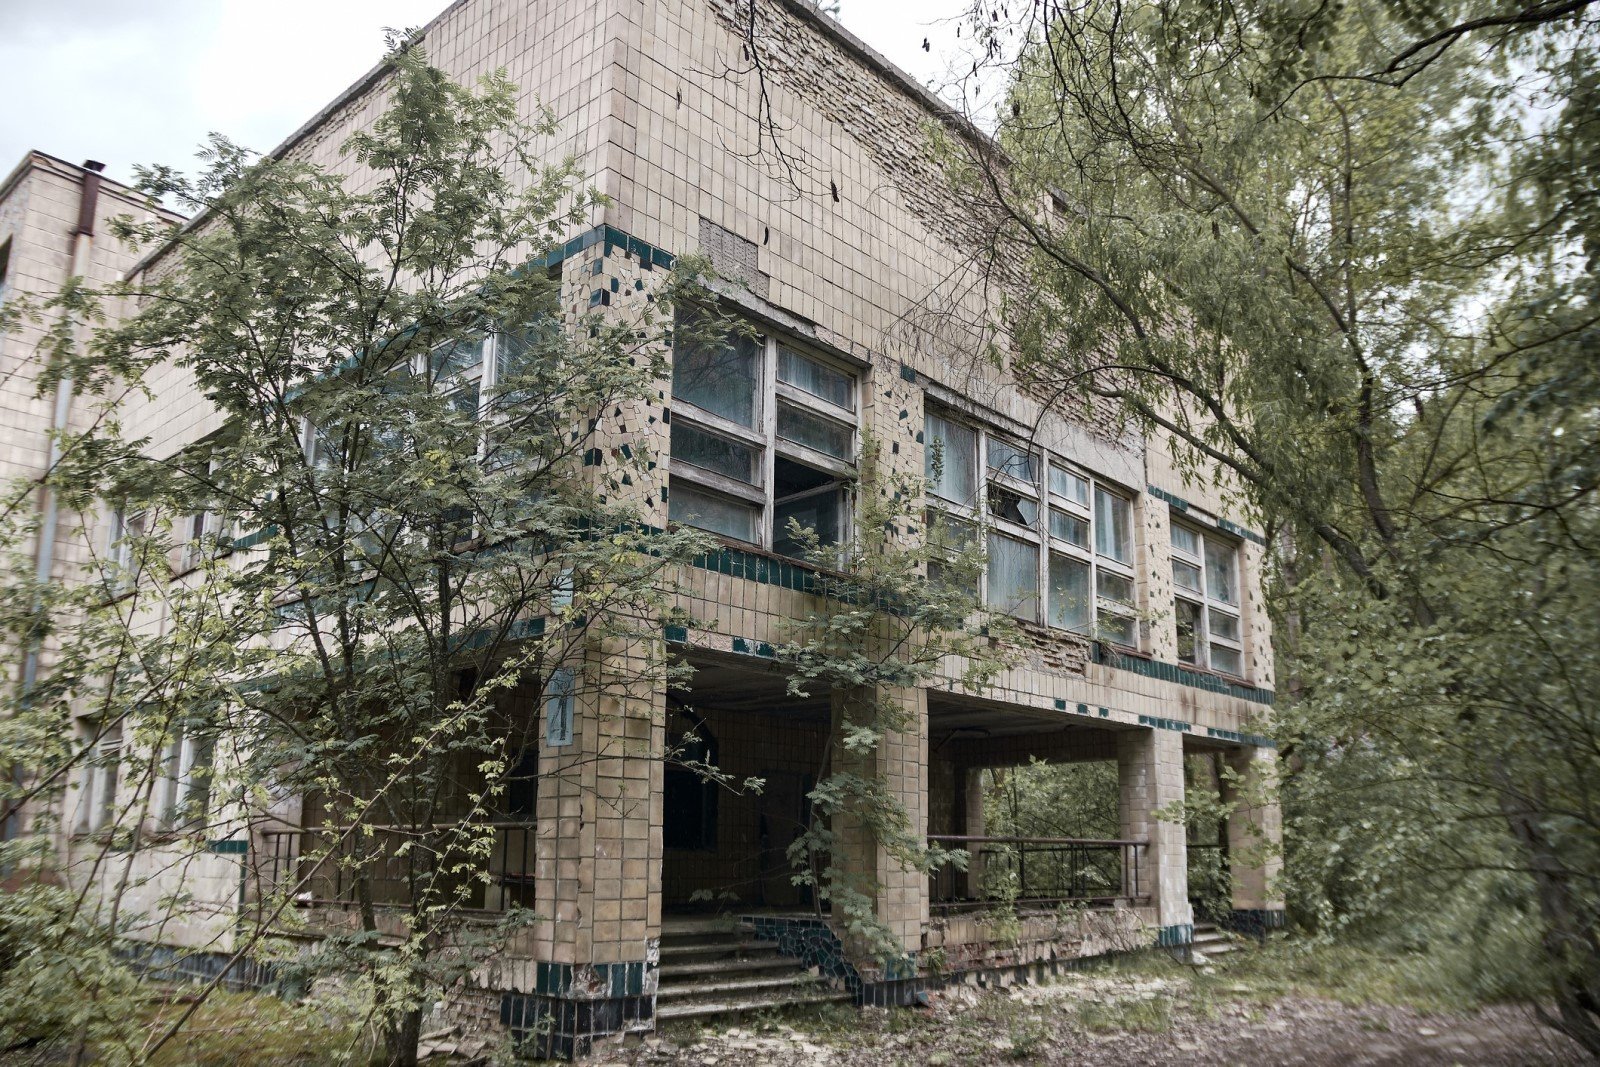 Is Photographing Abandoned Buildings Legal?